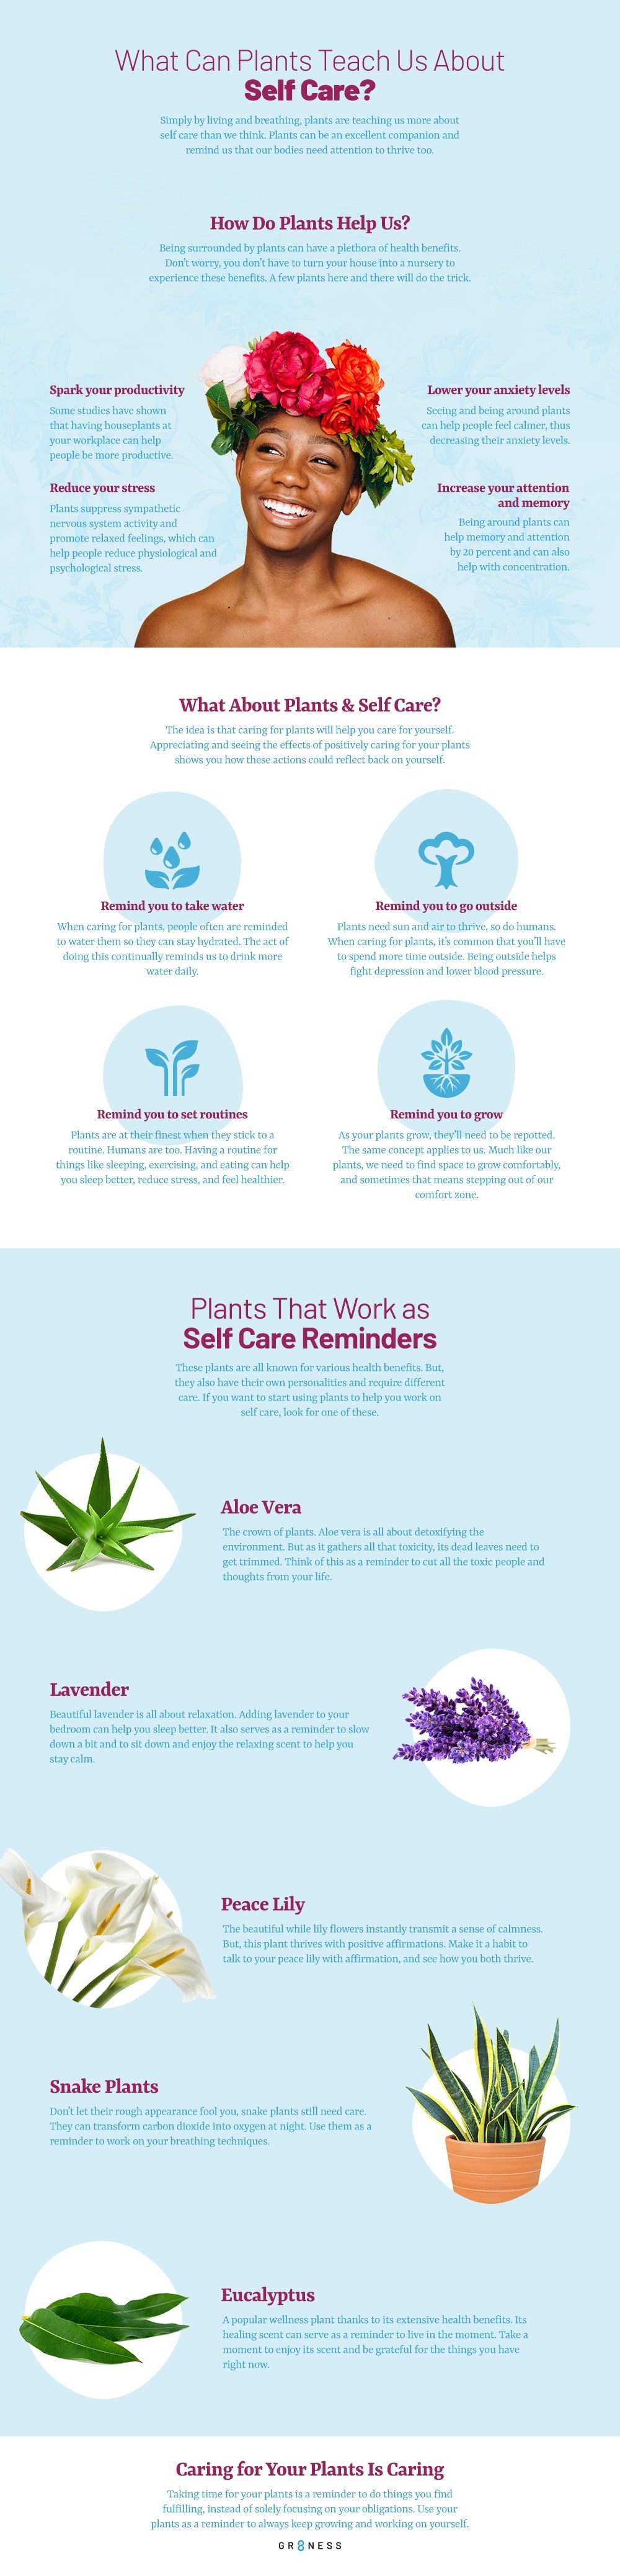 Self Care Ideas We Can Learn From Plants [Infographic]